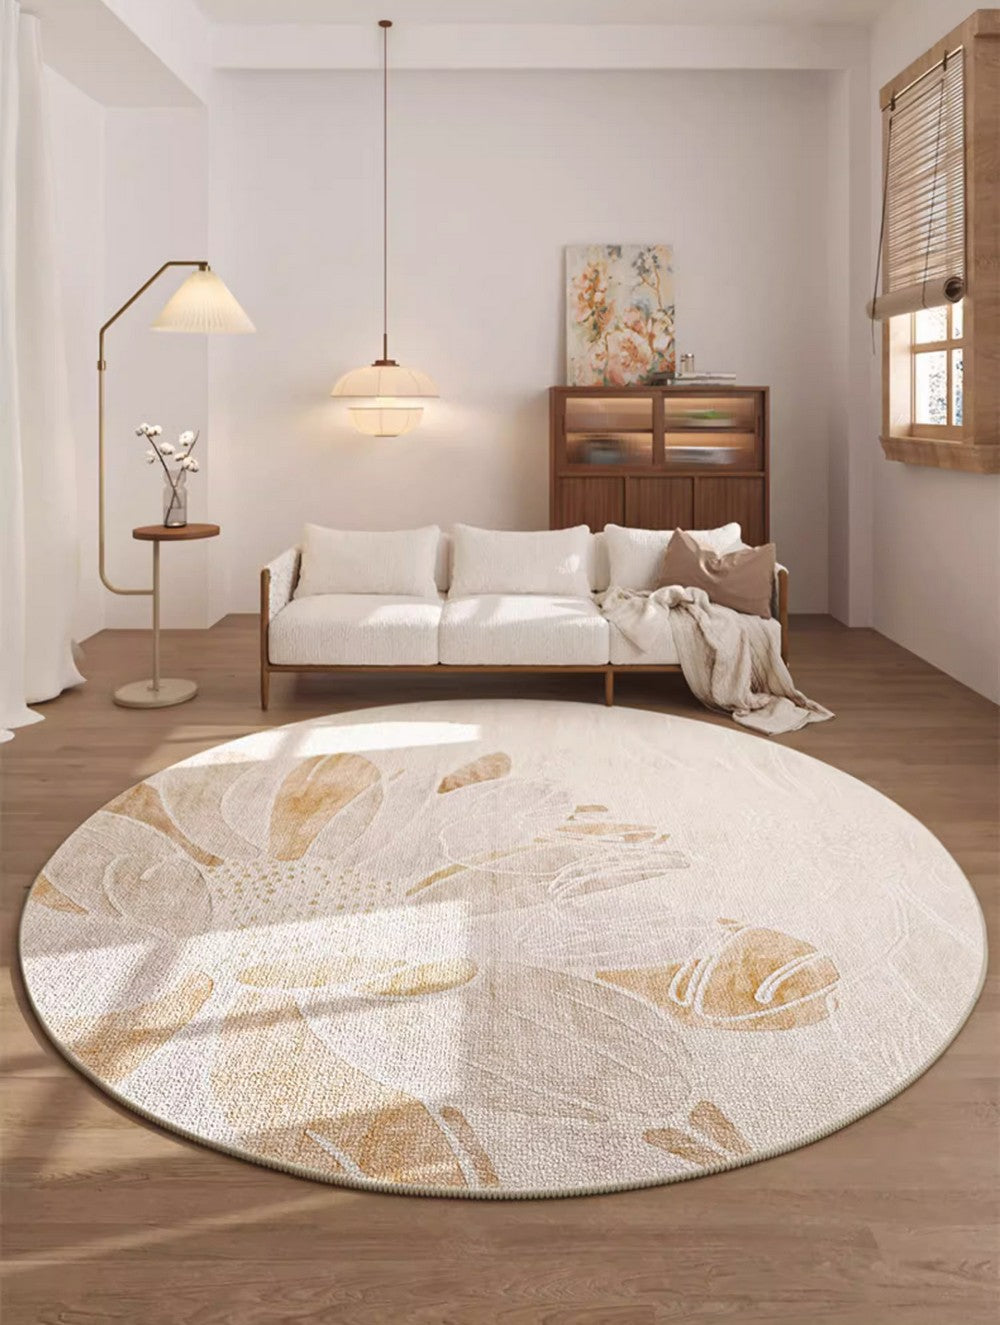 Lotus Flower Round Carpets under Coffee Table, Contemporary Round Rugs for Dining Room, Modern Area Rugs for Bedroom, Circular Modern Rugs for Living Room